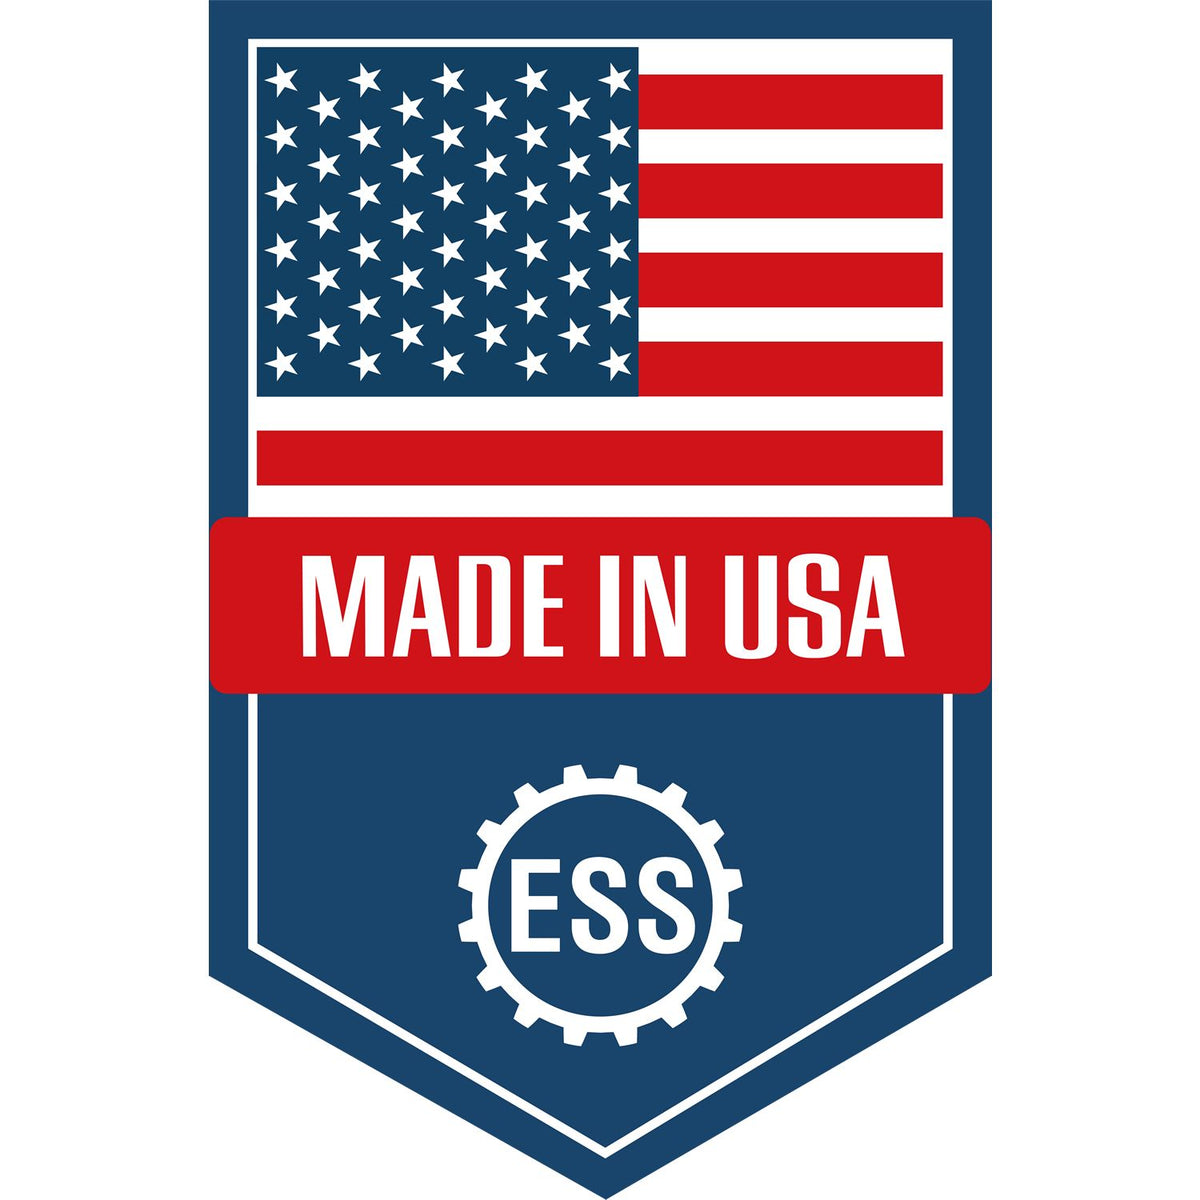 An icon or graphic with an american flag and text reading Made in USA for the Self-Inking Kentucky Landscape Architect Stamp